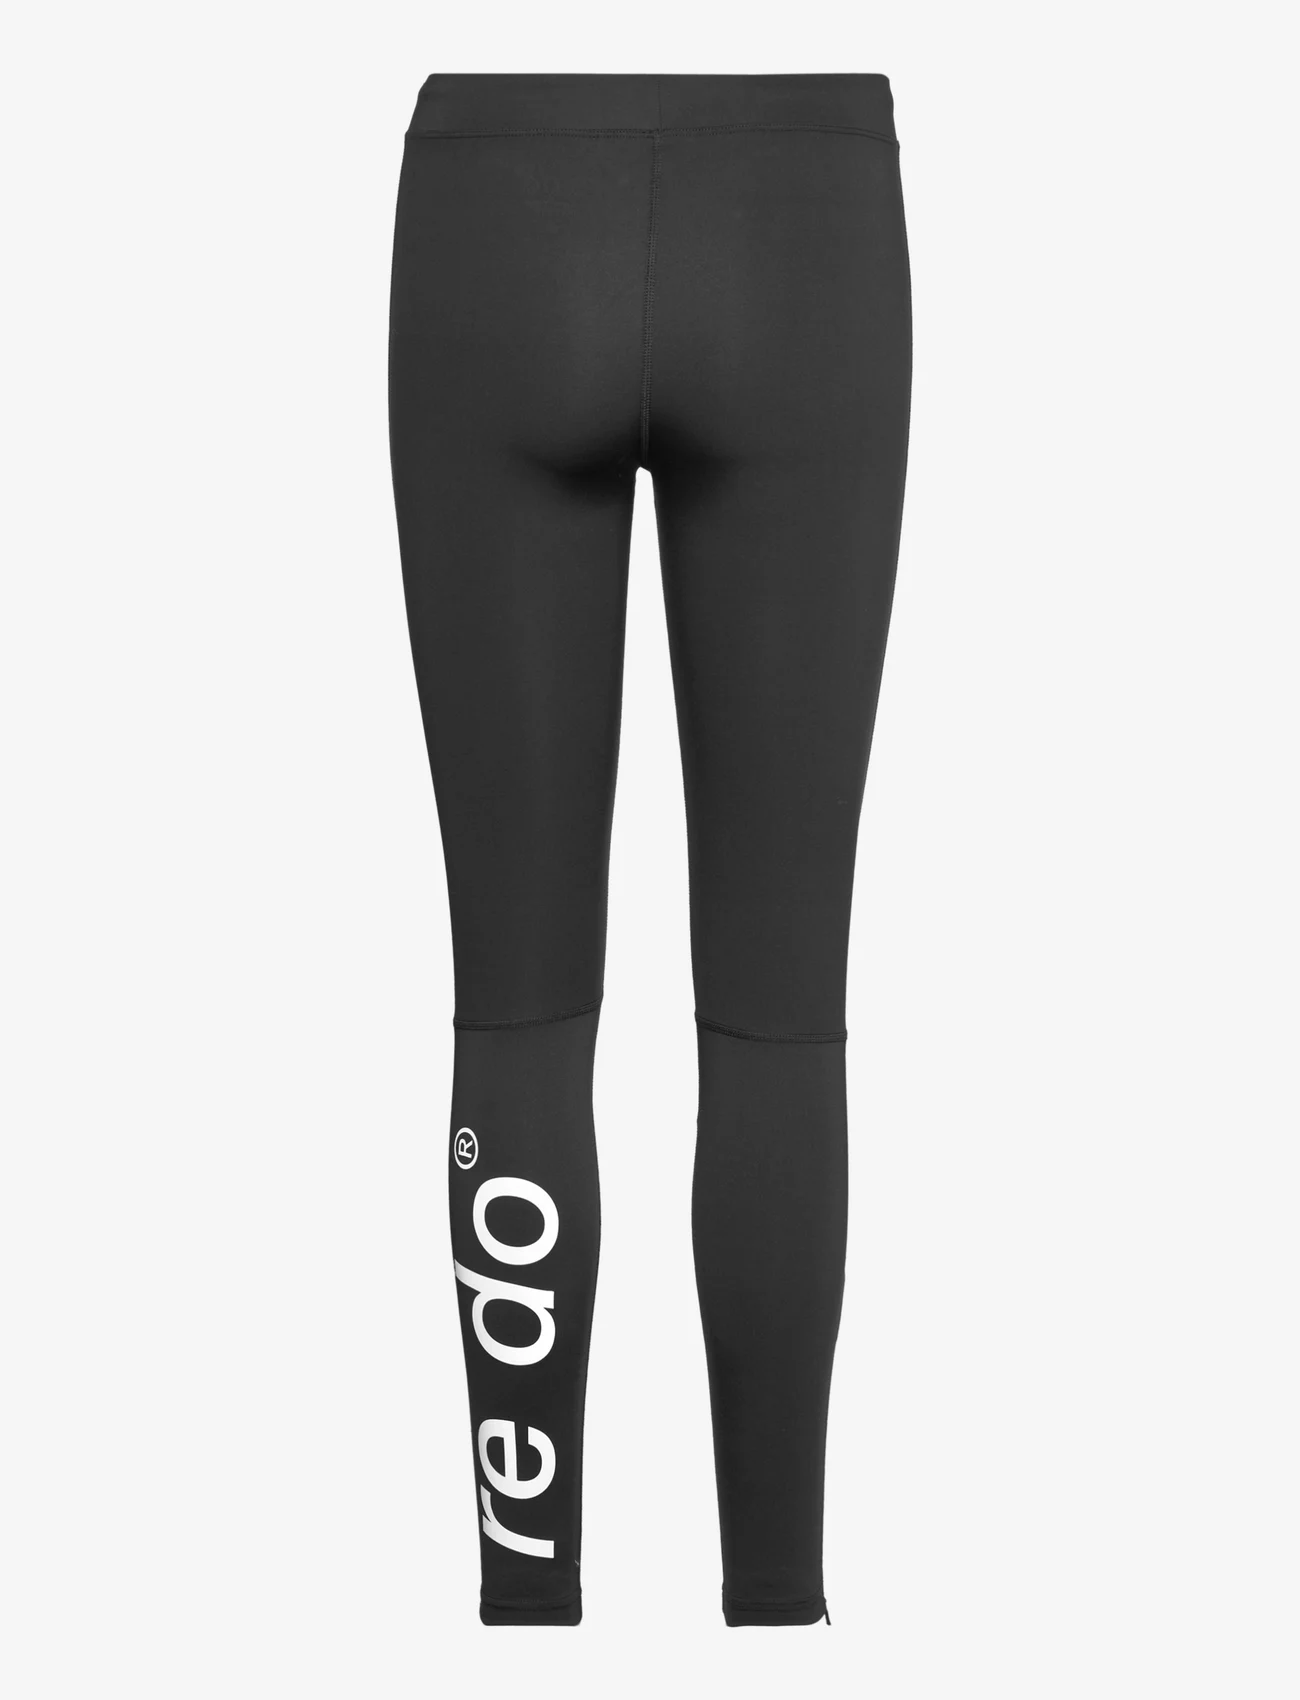 RE DO - Tights Peter - lauf- & trainingstights - black beauty - 1